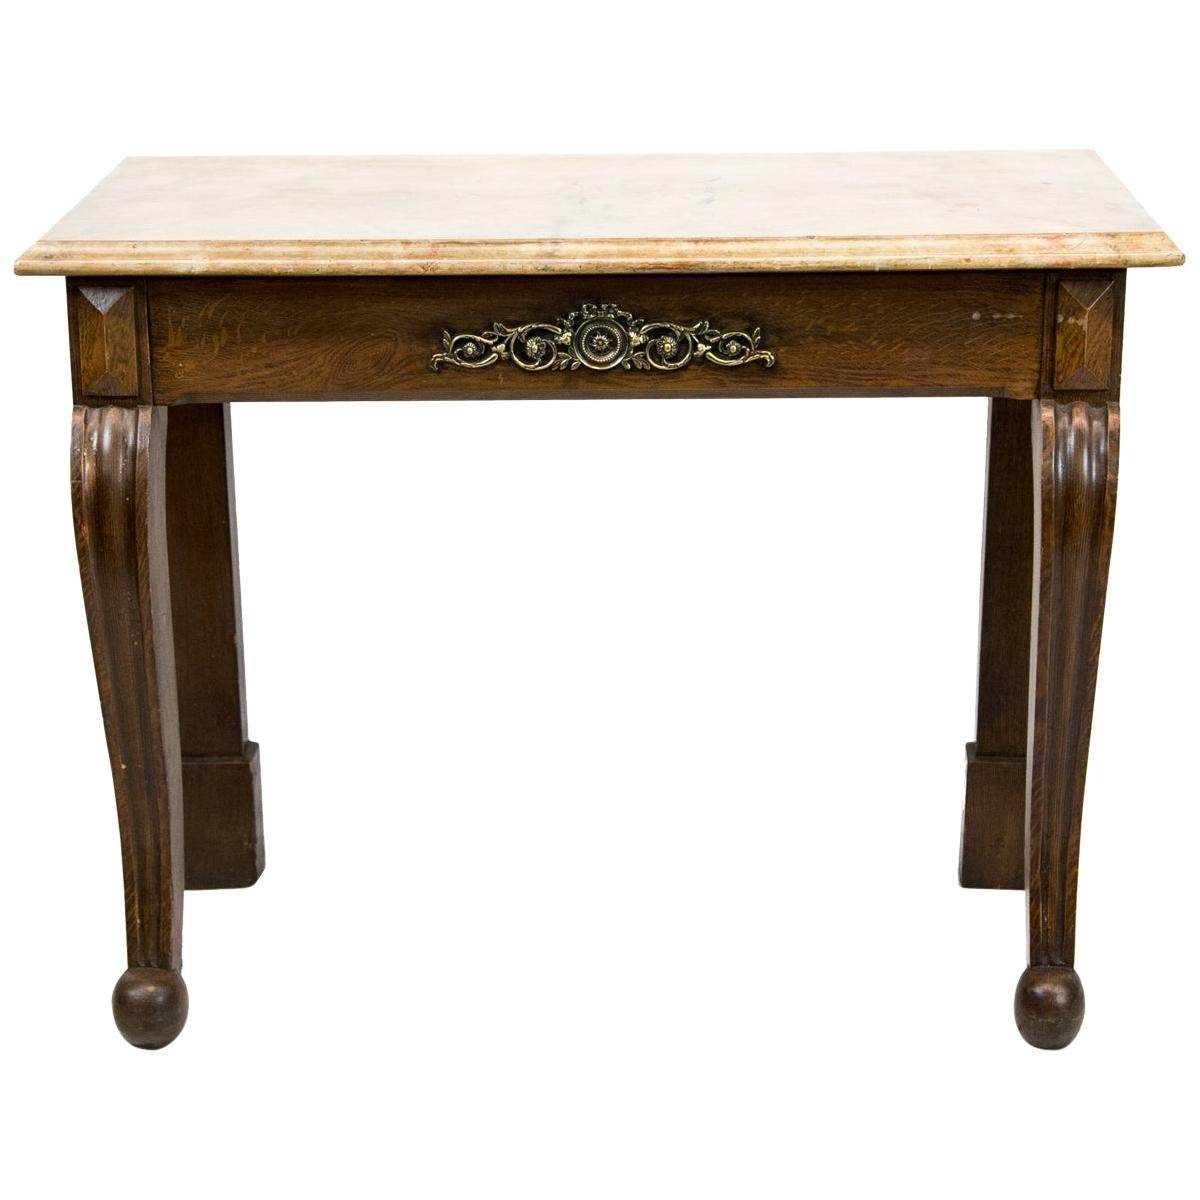 English Faux Painted Console Table